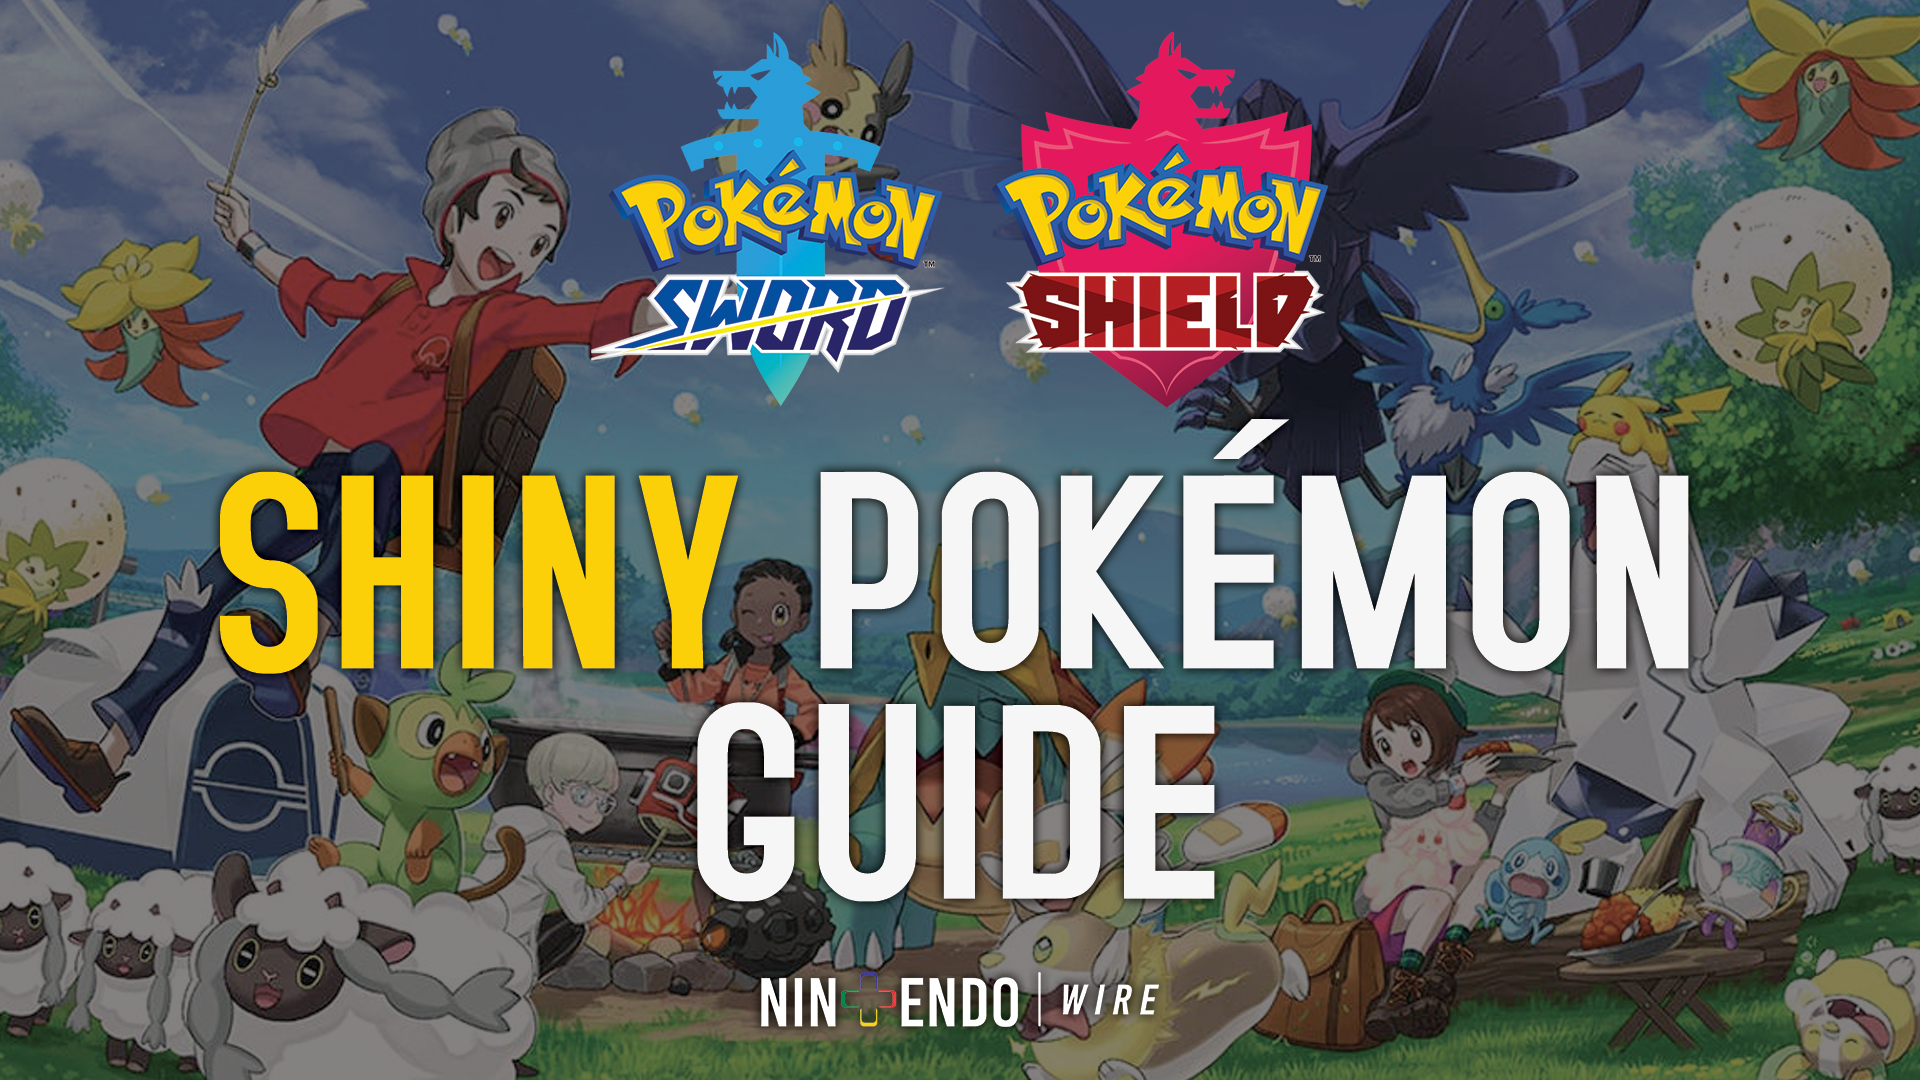 Guide: All Version Exclusives in Pokémon Sword and Shield – Nintendo Wire